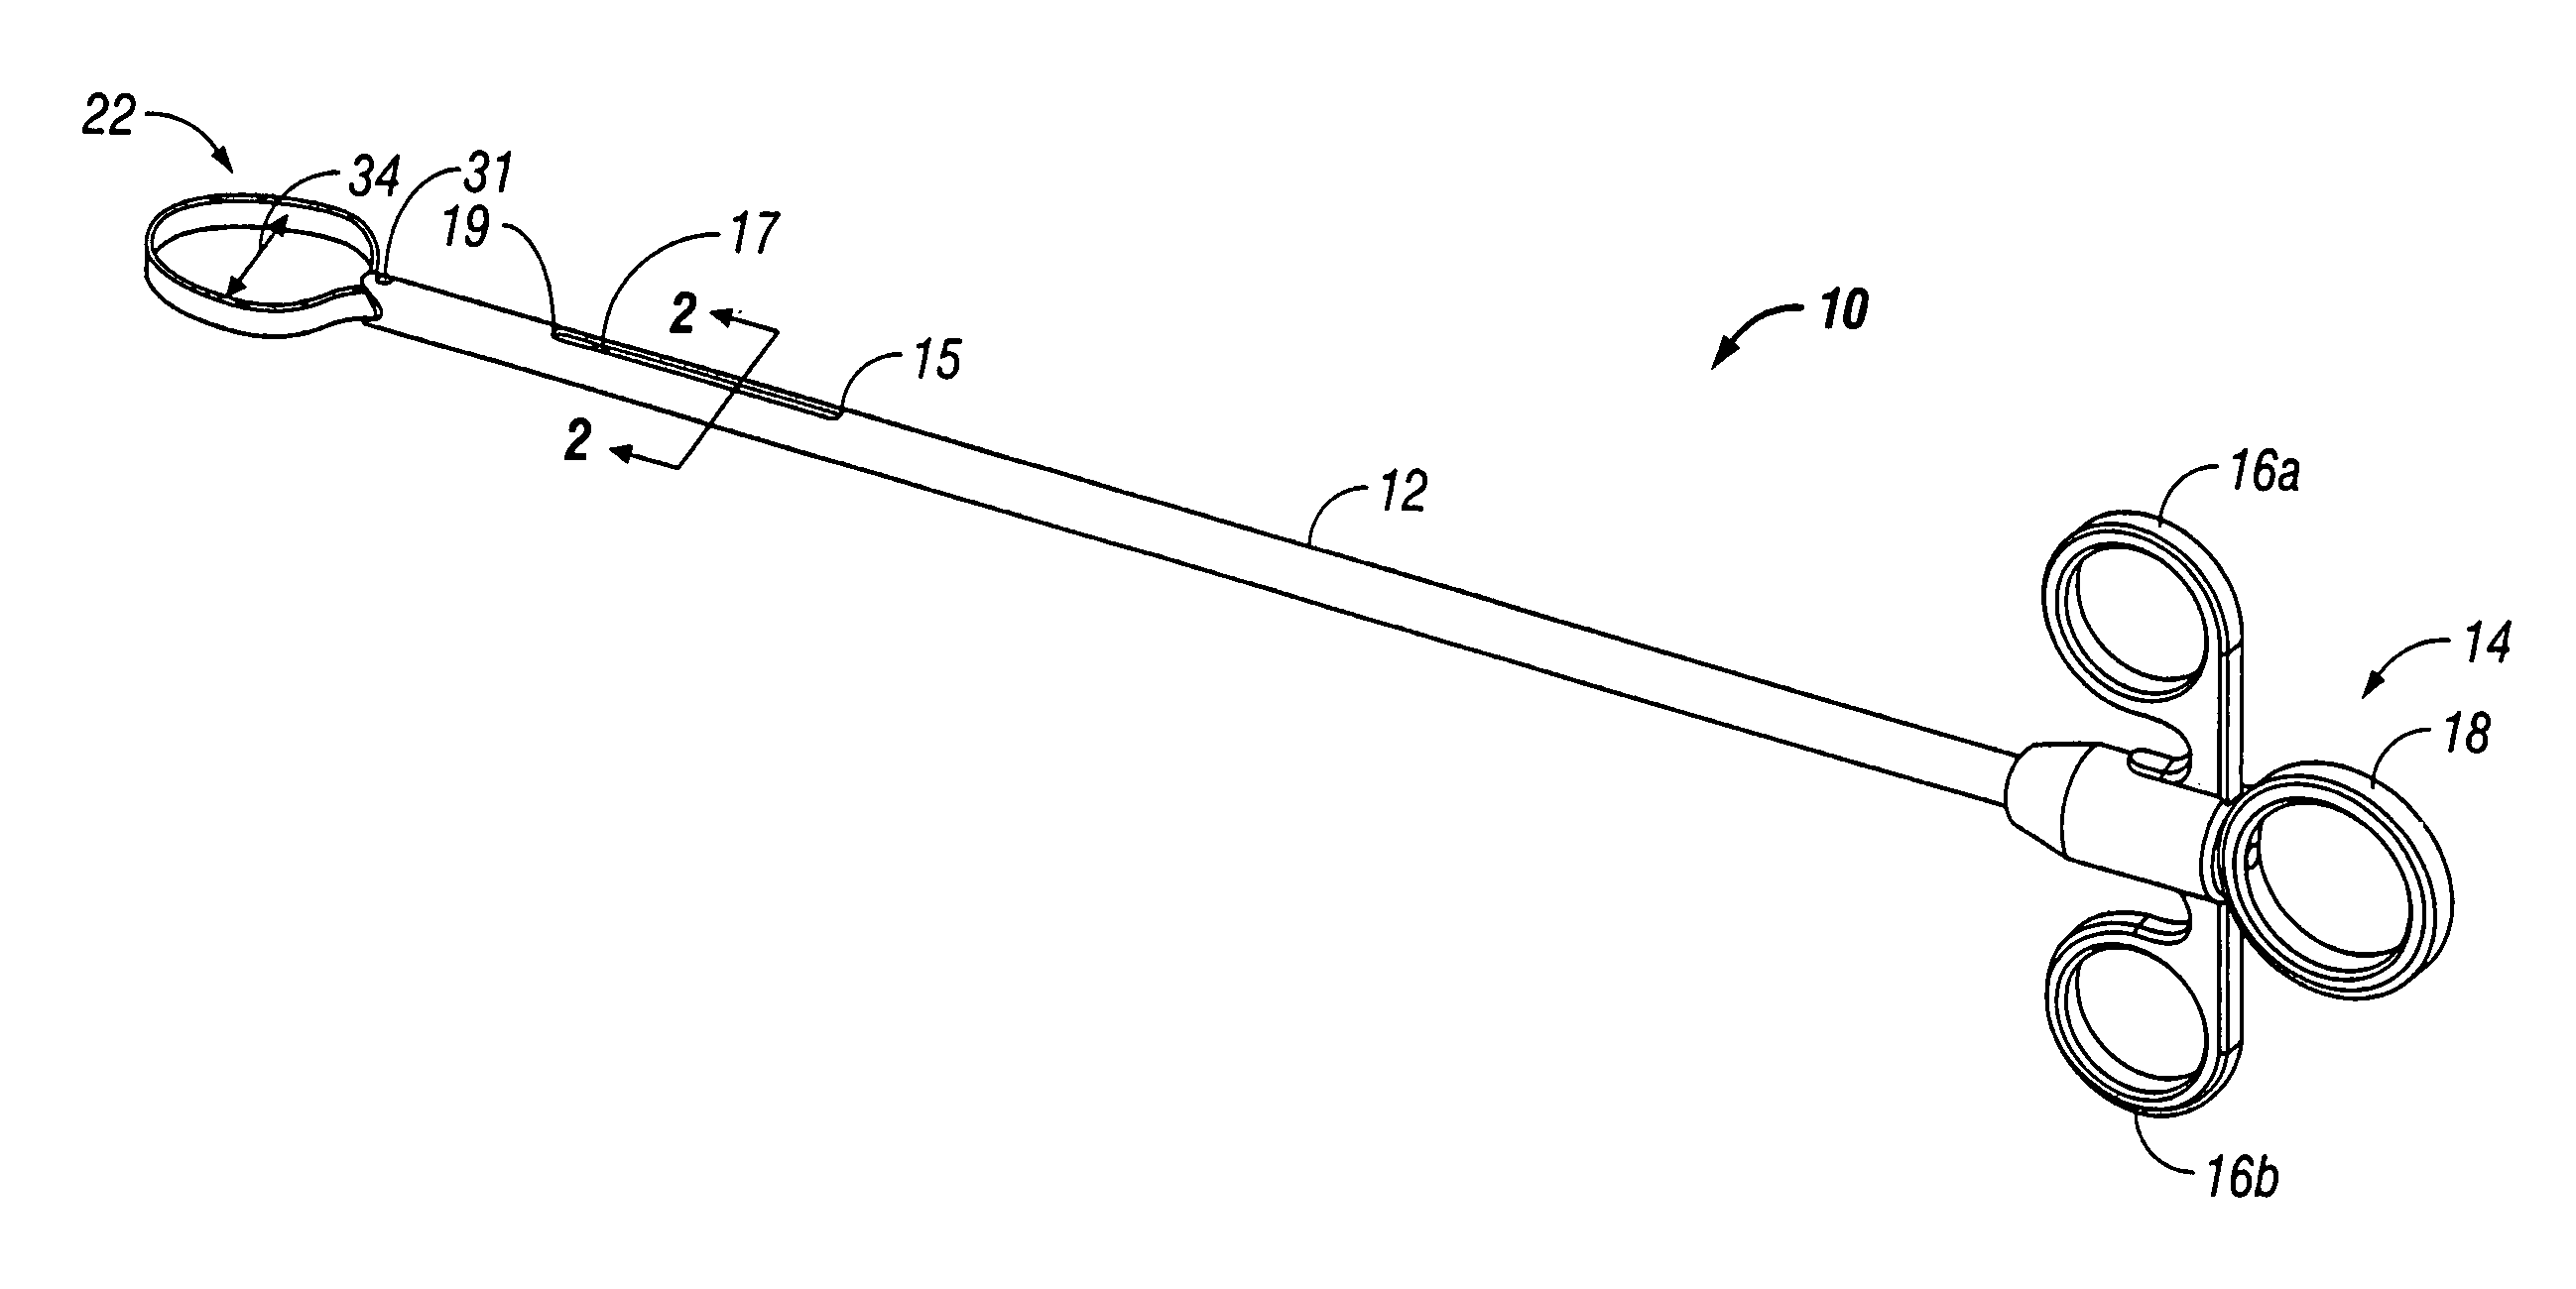 Apparatus for dimensioning circumference of cavity for introduction of a prosthetic implant